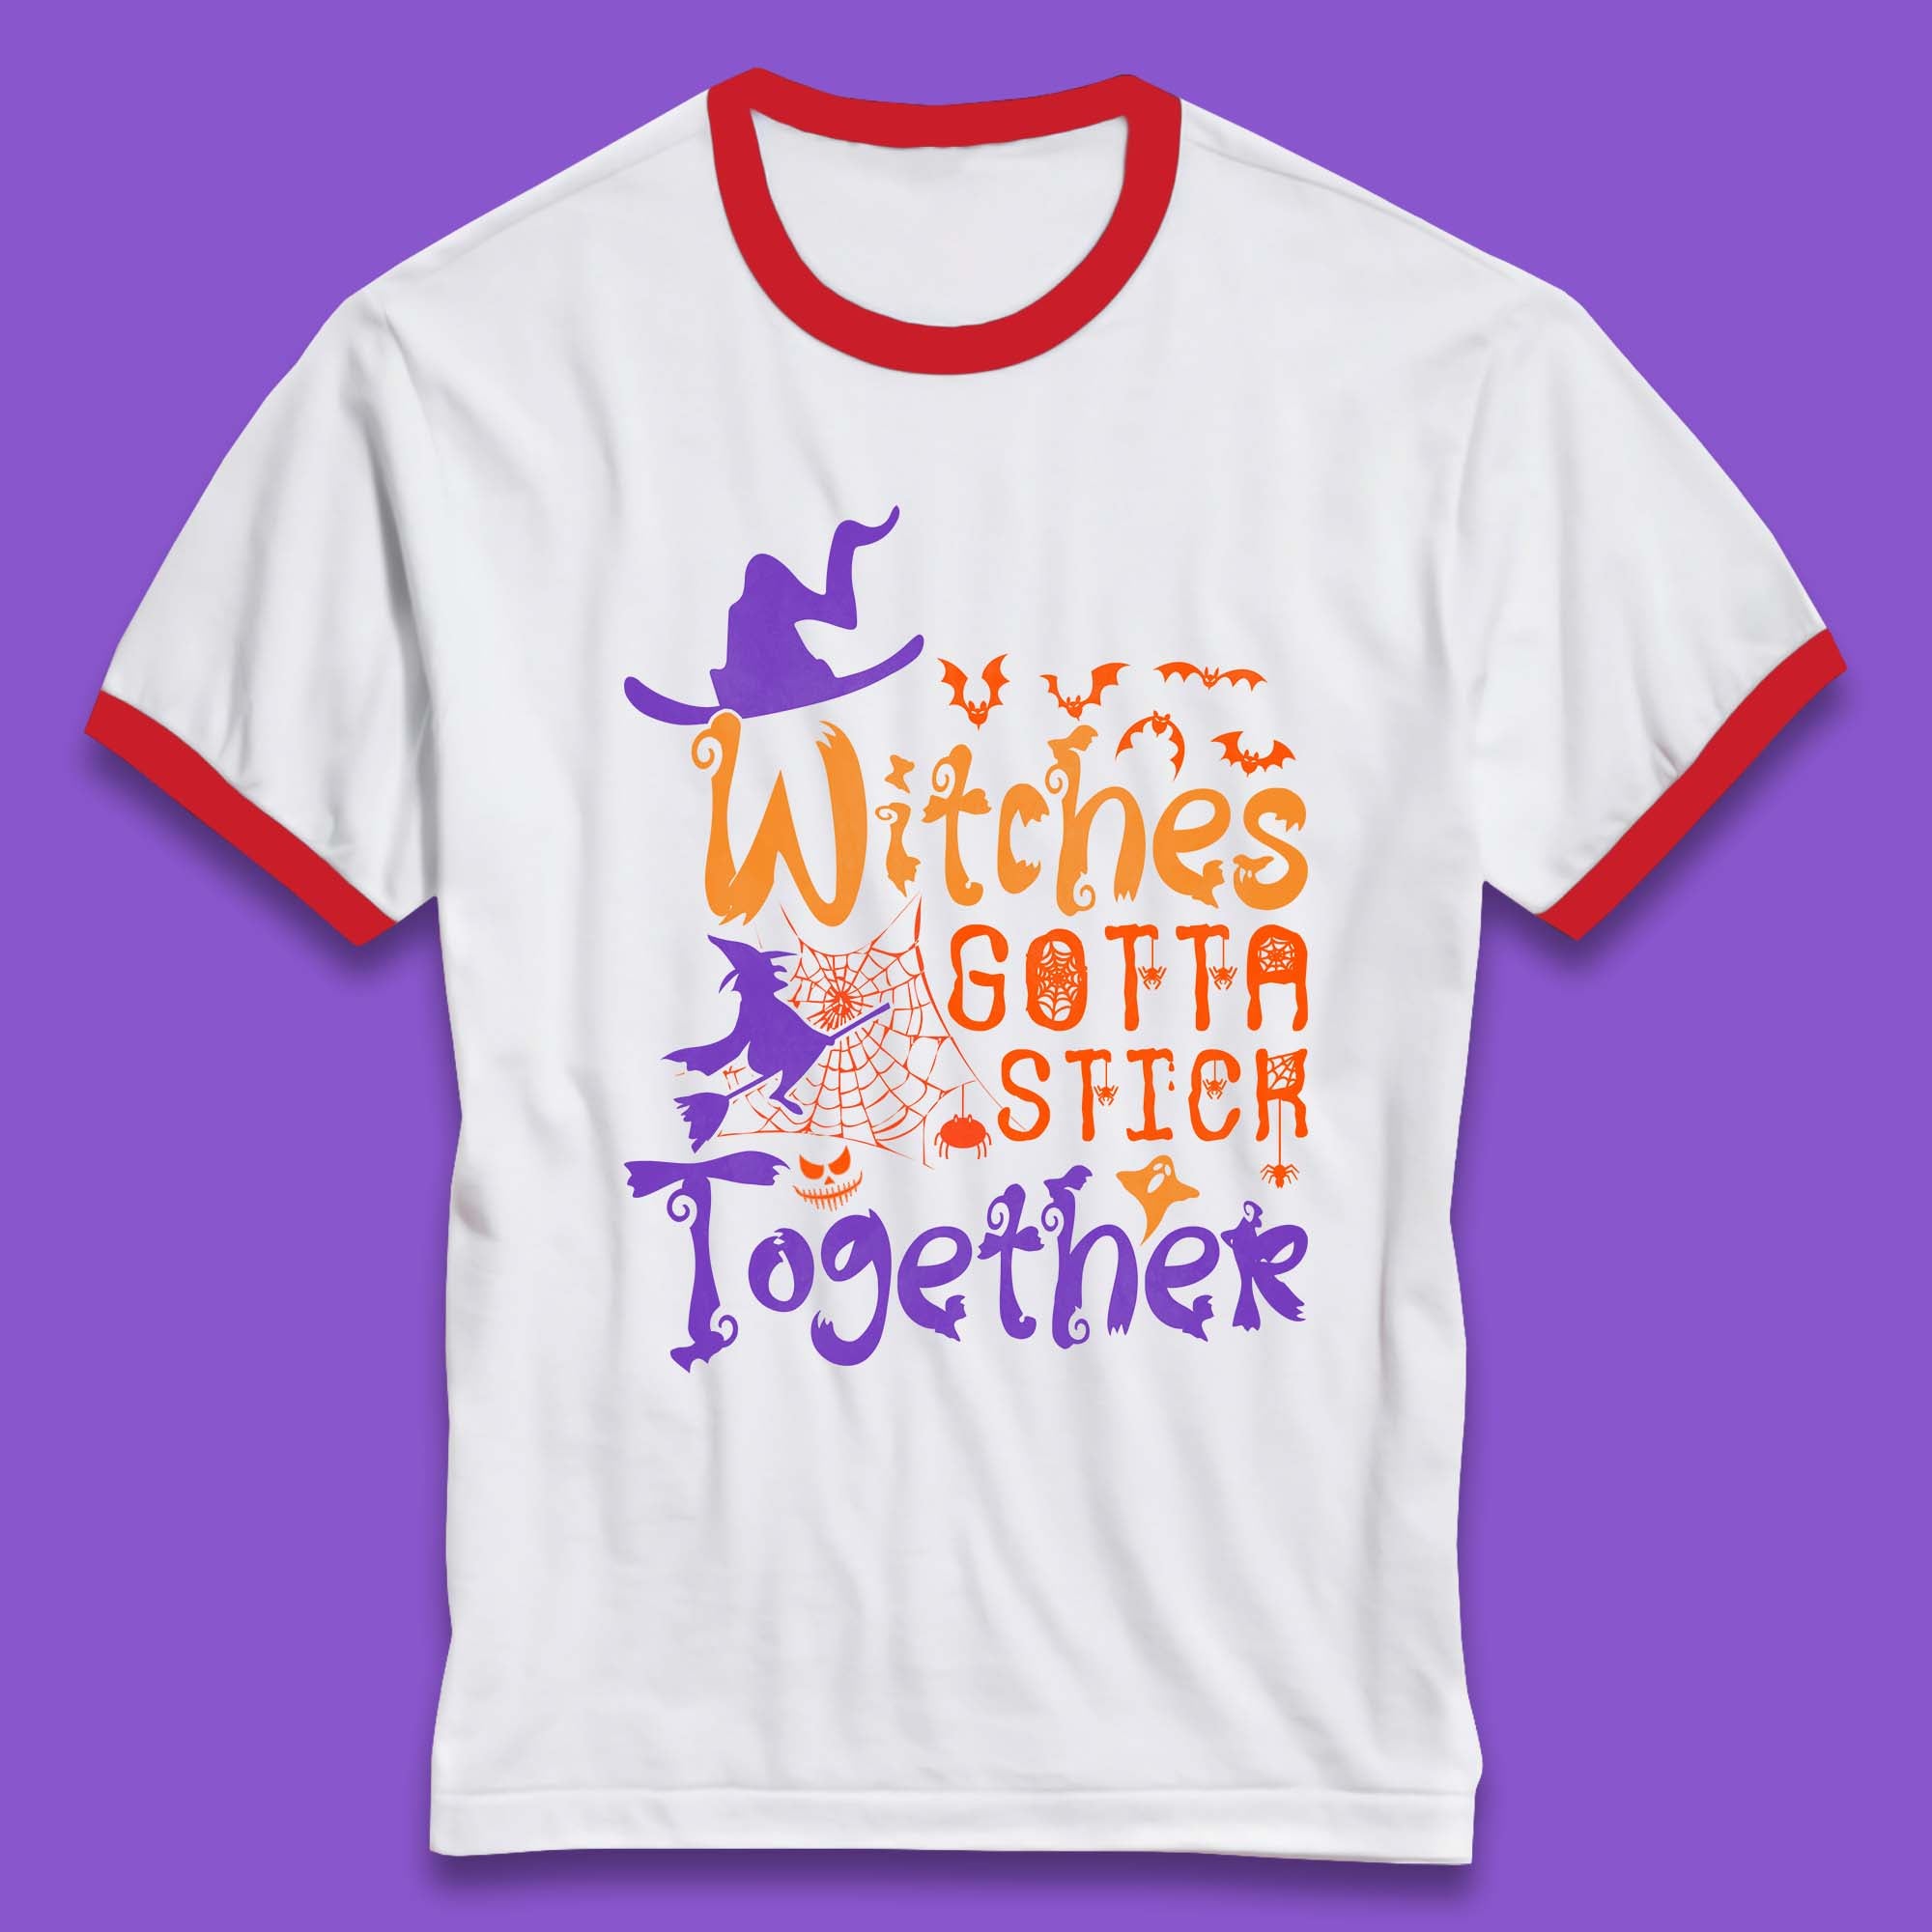 Witches Gotta Stick Together Funny Halloween Witchy Ringer T Shirt